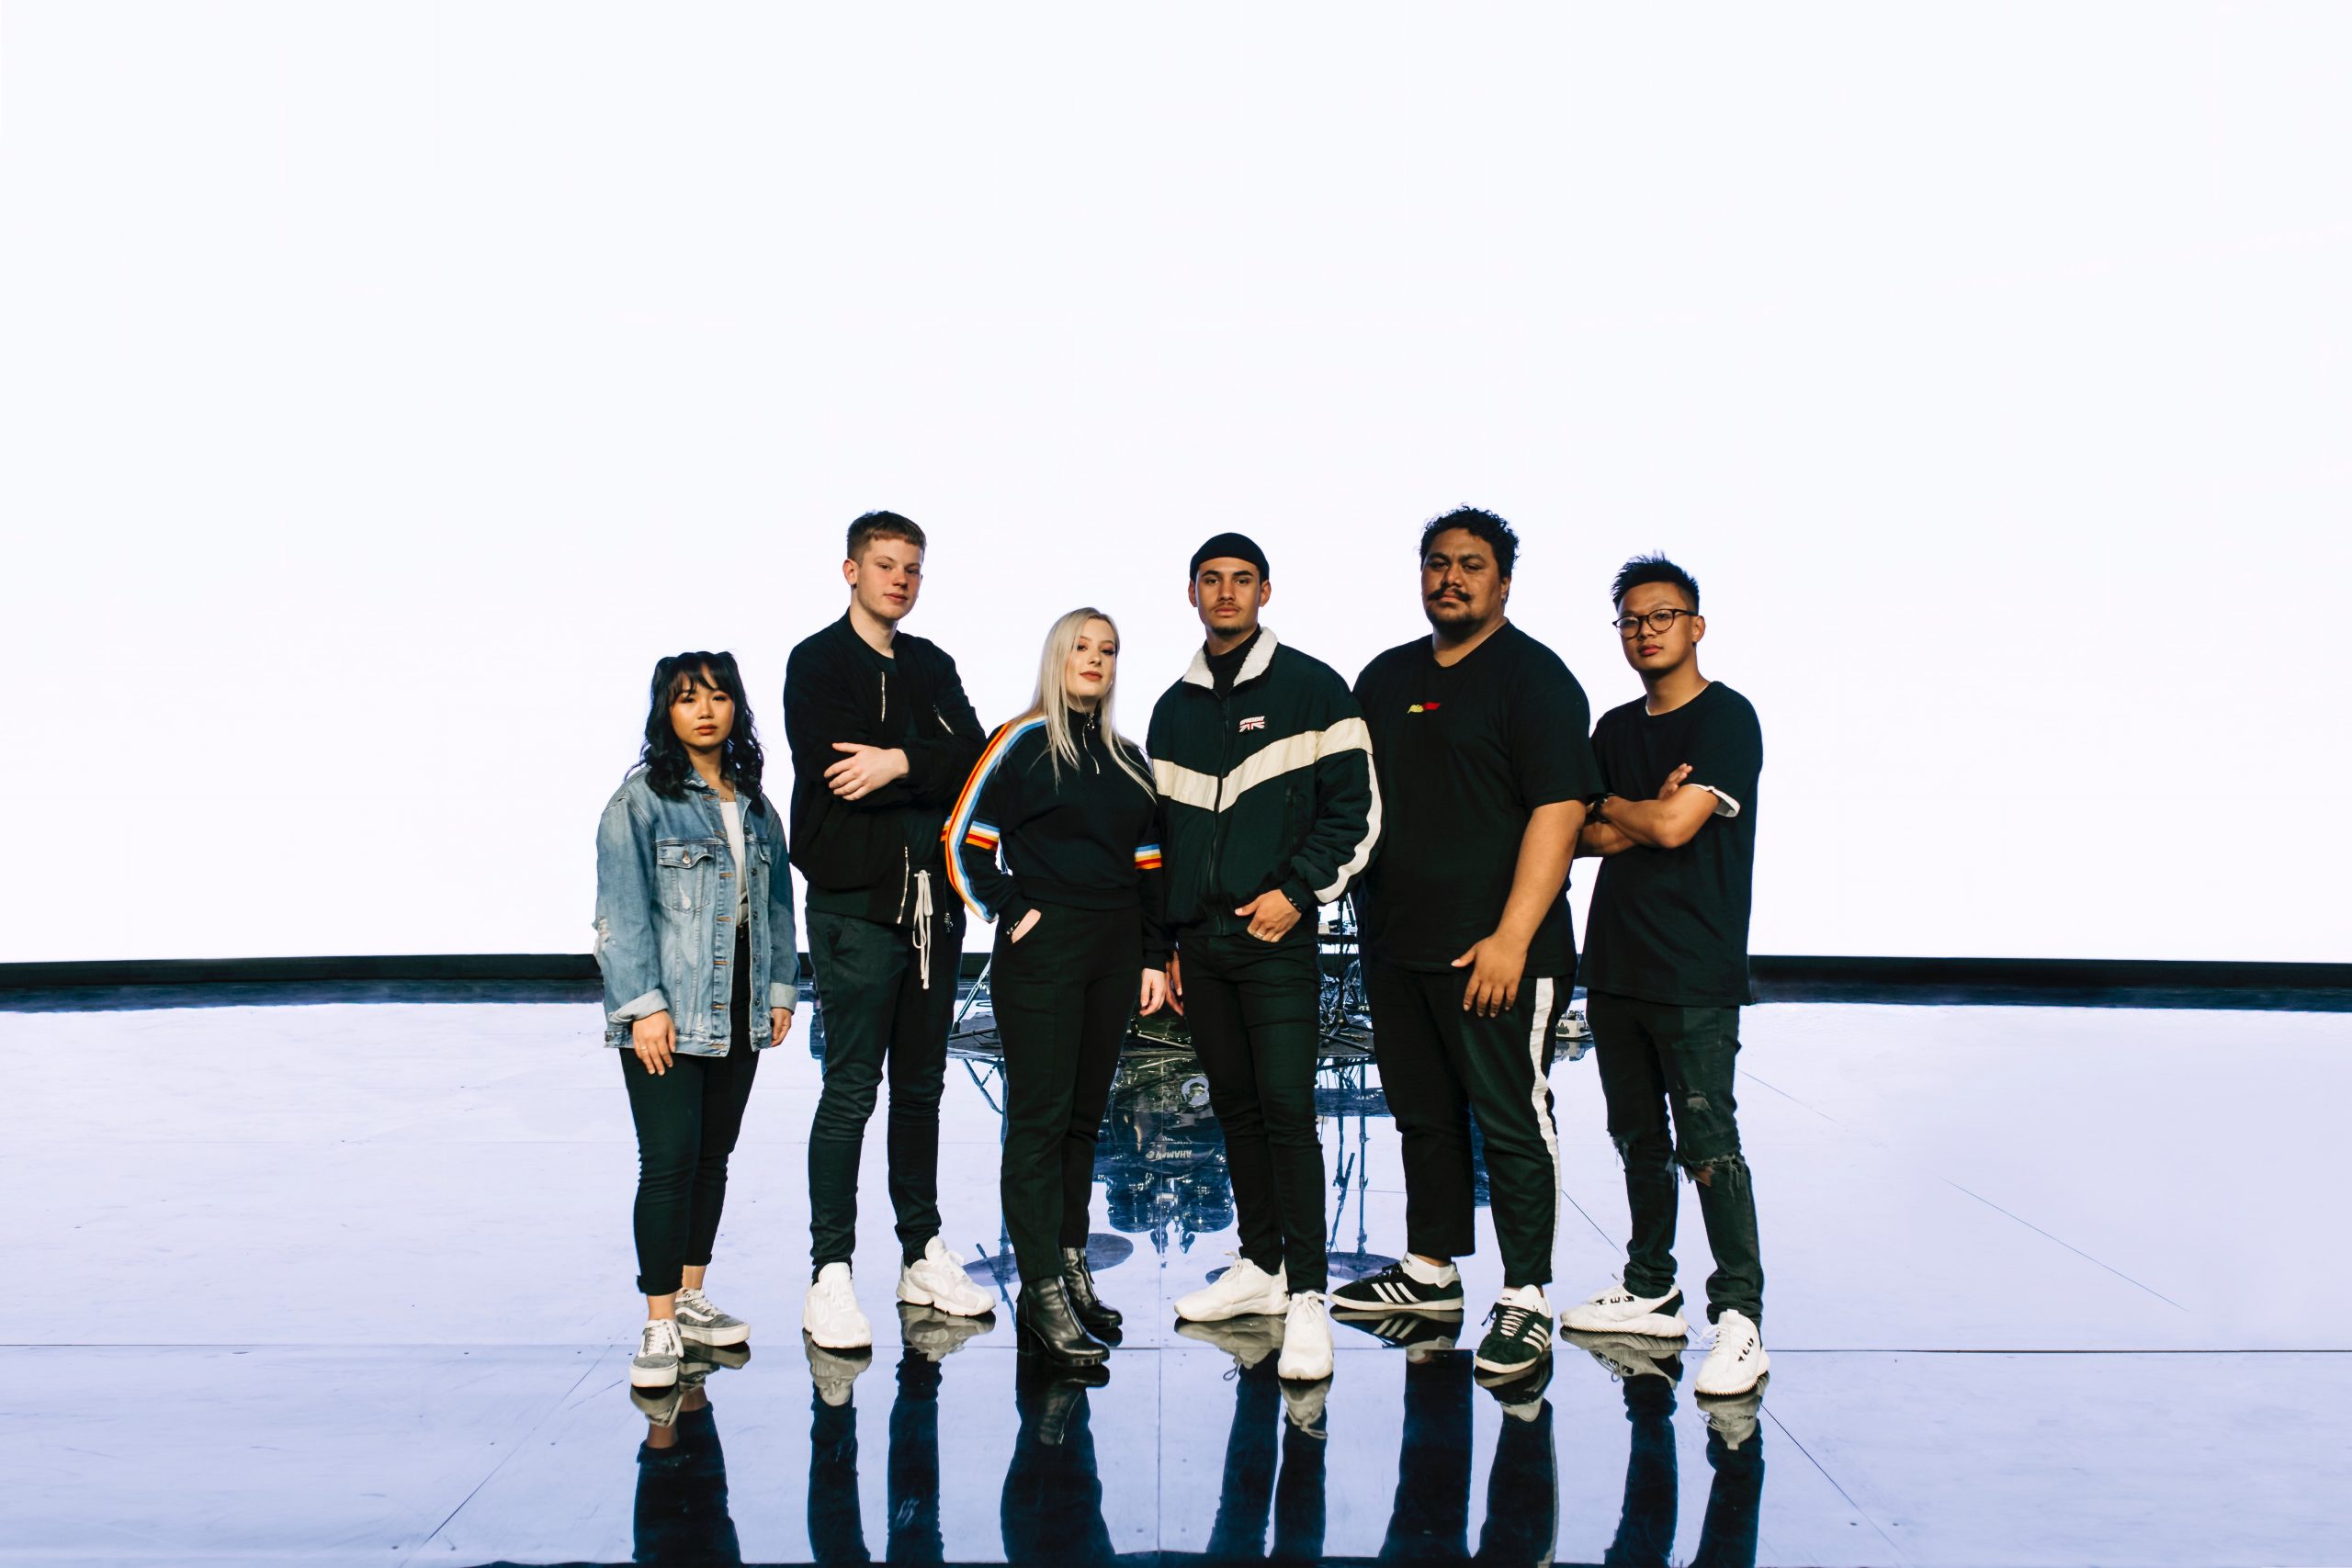 Planetshakers' Youth Band planetboom Releases New Recording 'I Was